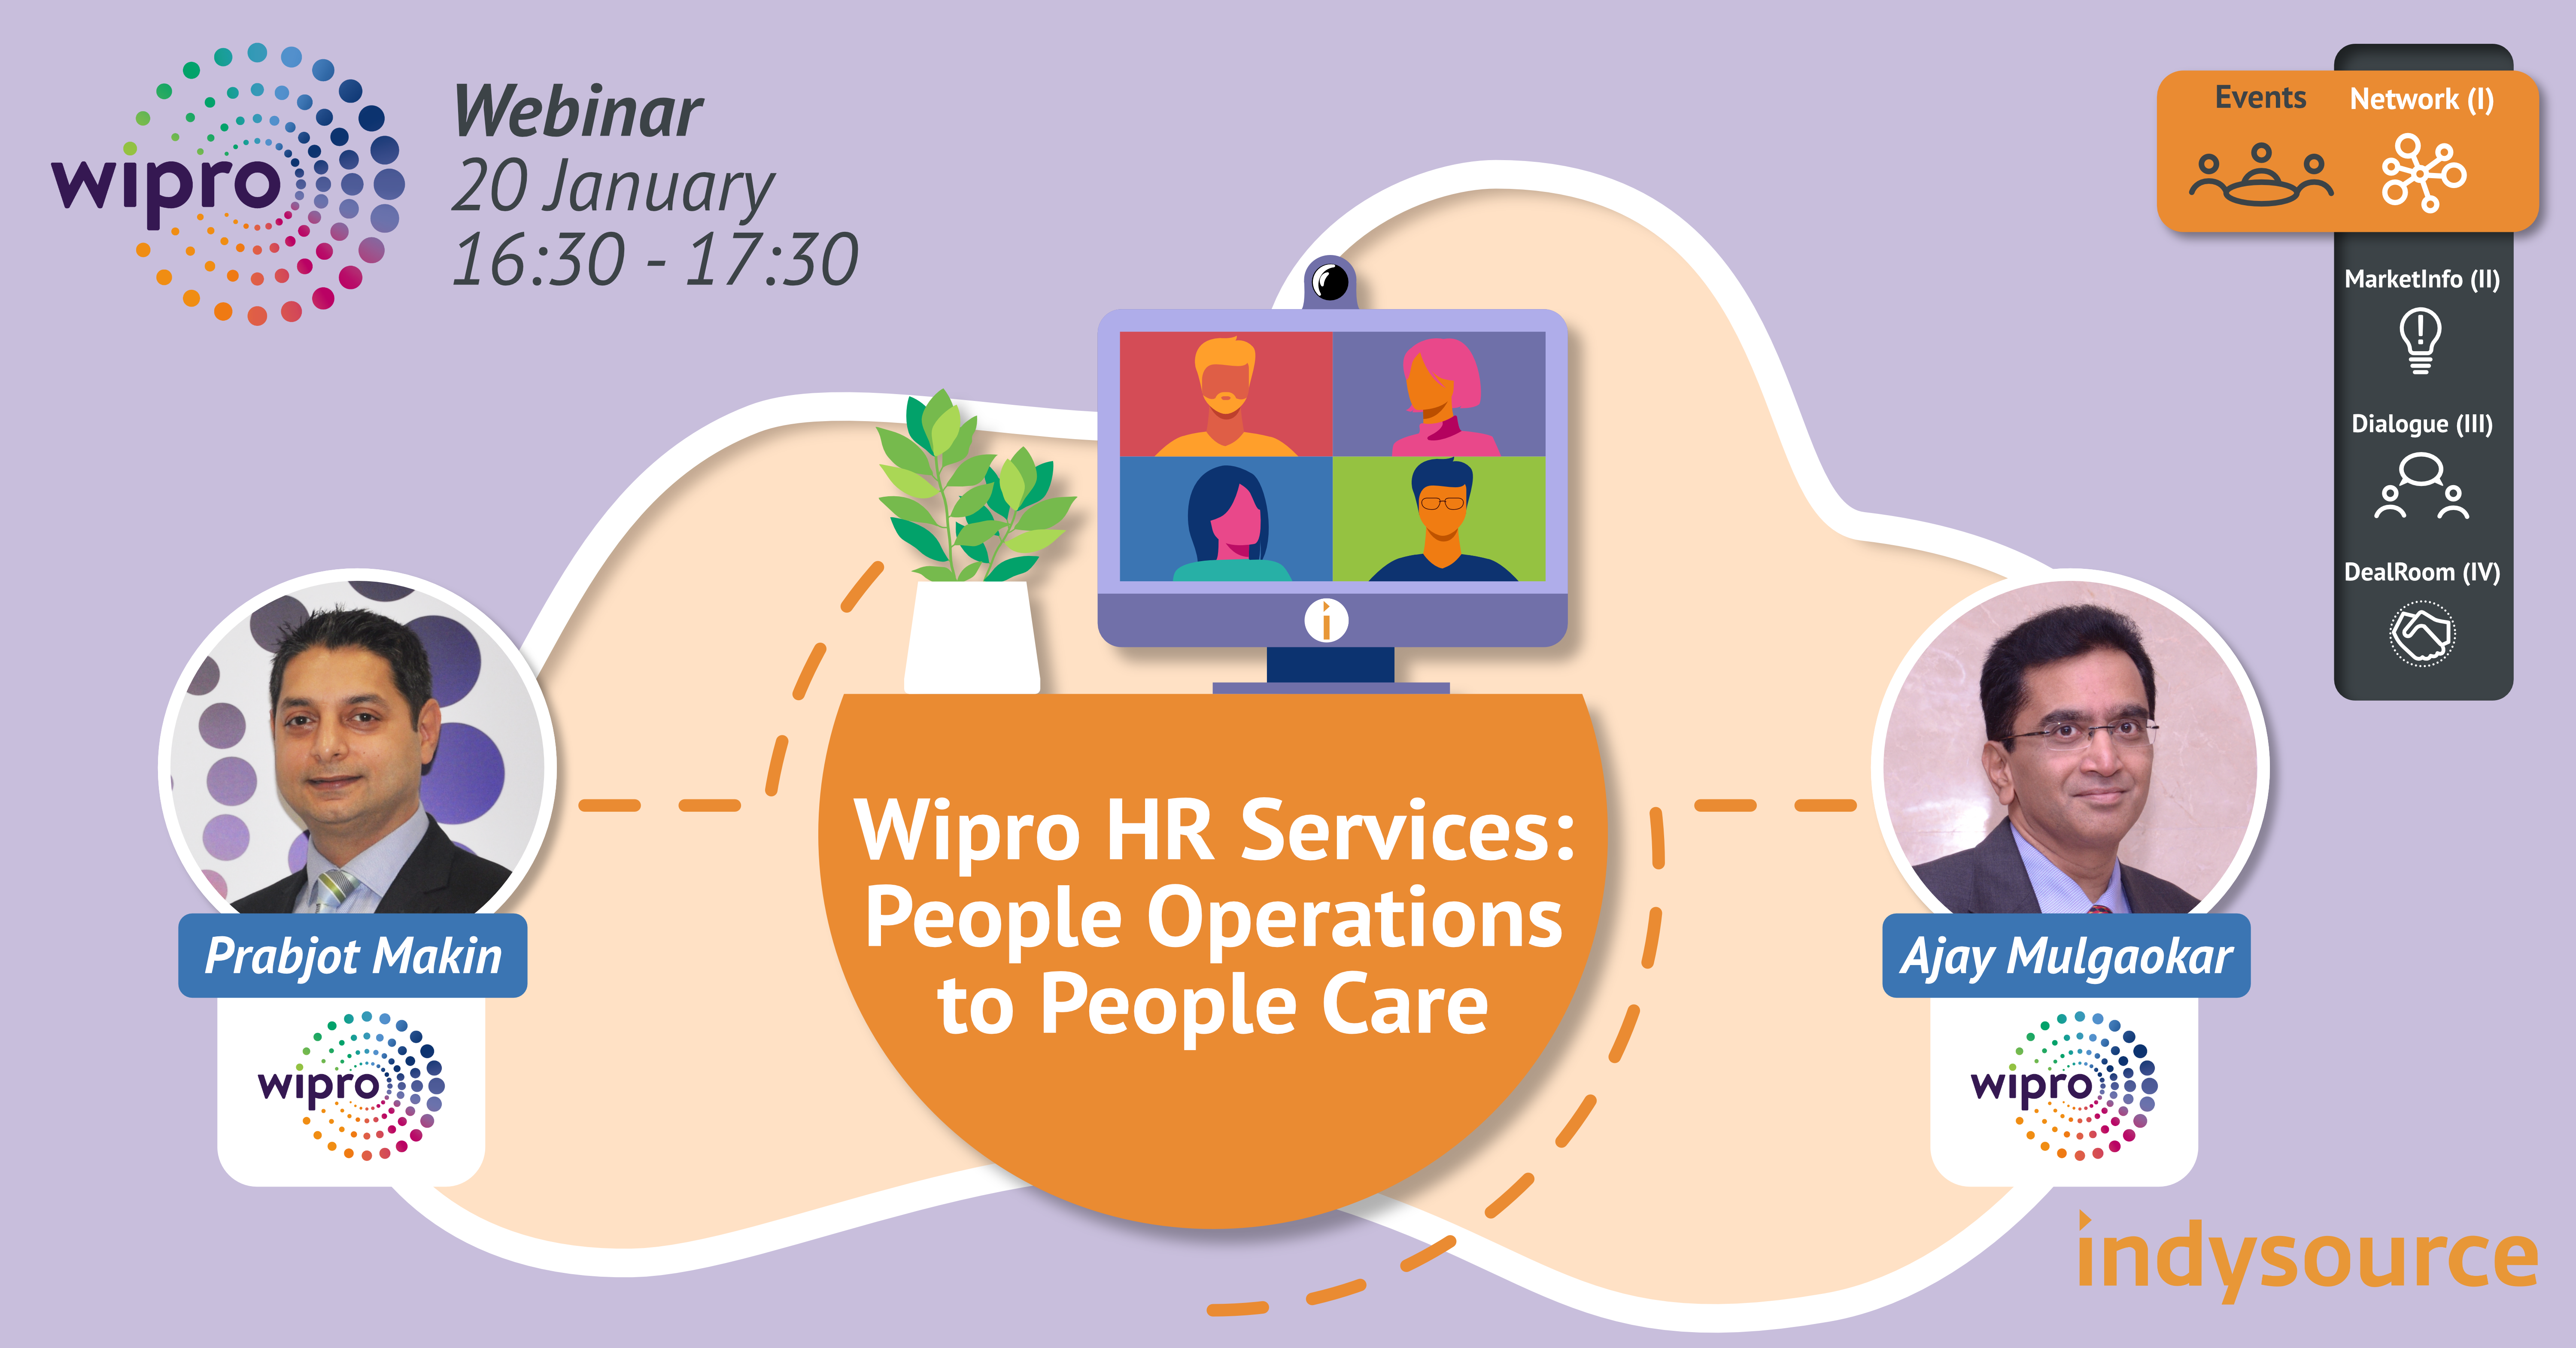 Wipro HR Services - People Operations to People Care